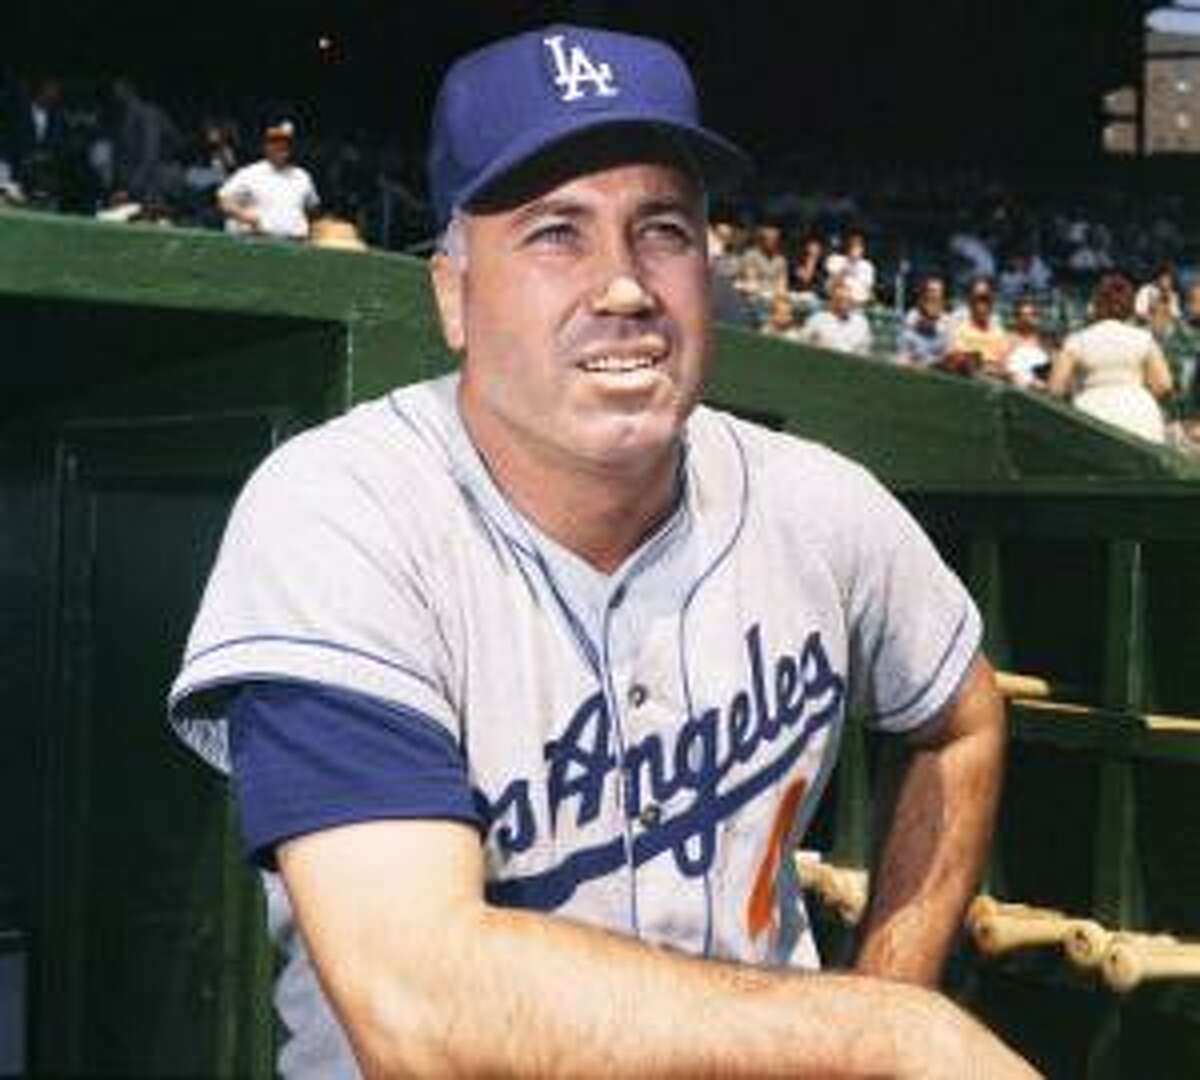 AP In this August 1962, file photo, Los Angeles Dodgers outfielder Duke Snider poses at a baseball game, location not known. Snider, 84, died early Sunday of what the family called natural causes at the Valle Vista Convalescent Hospital in Escondido, Calif. Snider was part of the charmed "Boys of Summer" with the Dodgers in the late 1940s and 1950s. He helped lead Brooklyn to its only World Series championship in 1955.